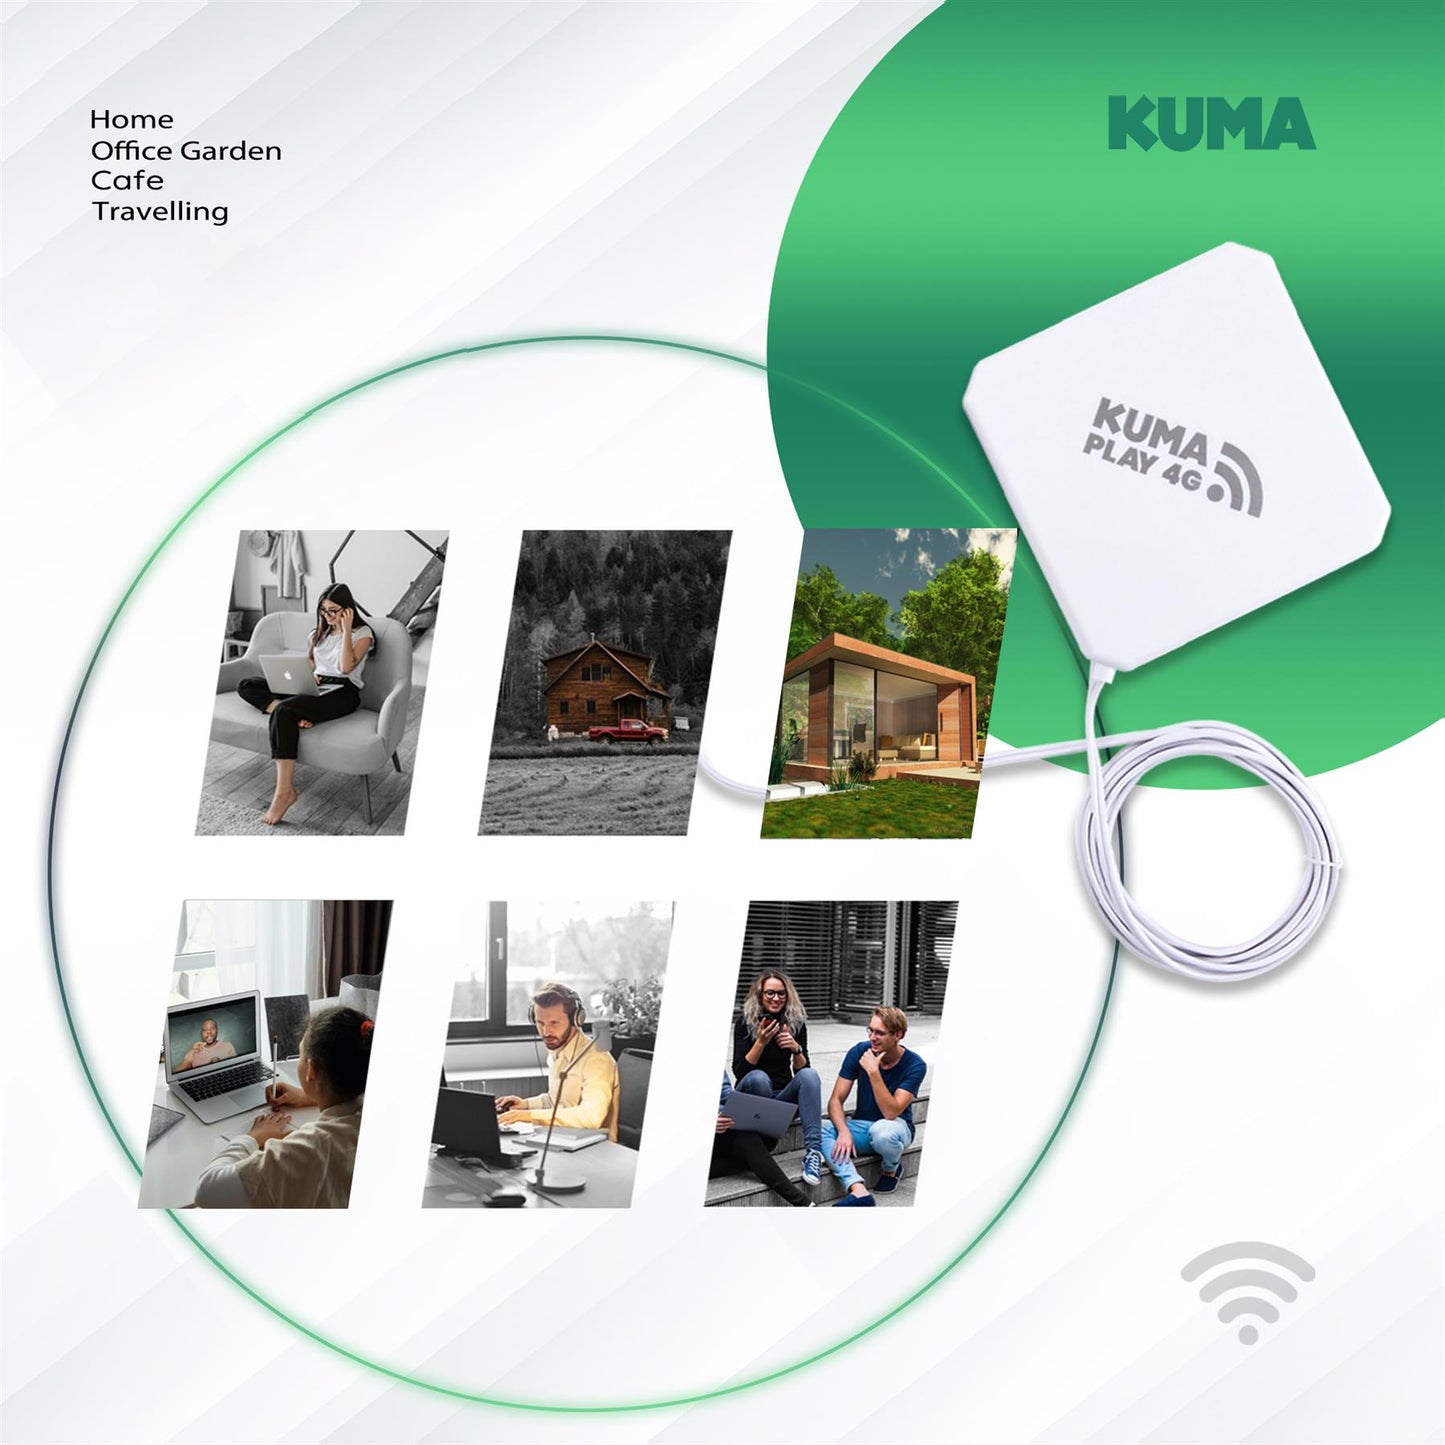 KUMA CONNECT PLAY - SIM Unlocked LiTE 4G Router with Indoor PLAY Antenna - Turn 4G LTE Signal into Wifi Internet Hotspot for House Garden Office Caravan Motorhome Boat - Wireless Device Booster Kit